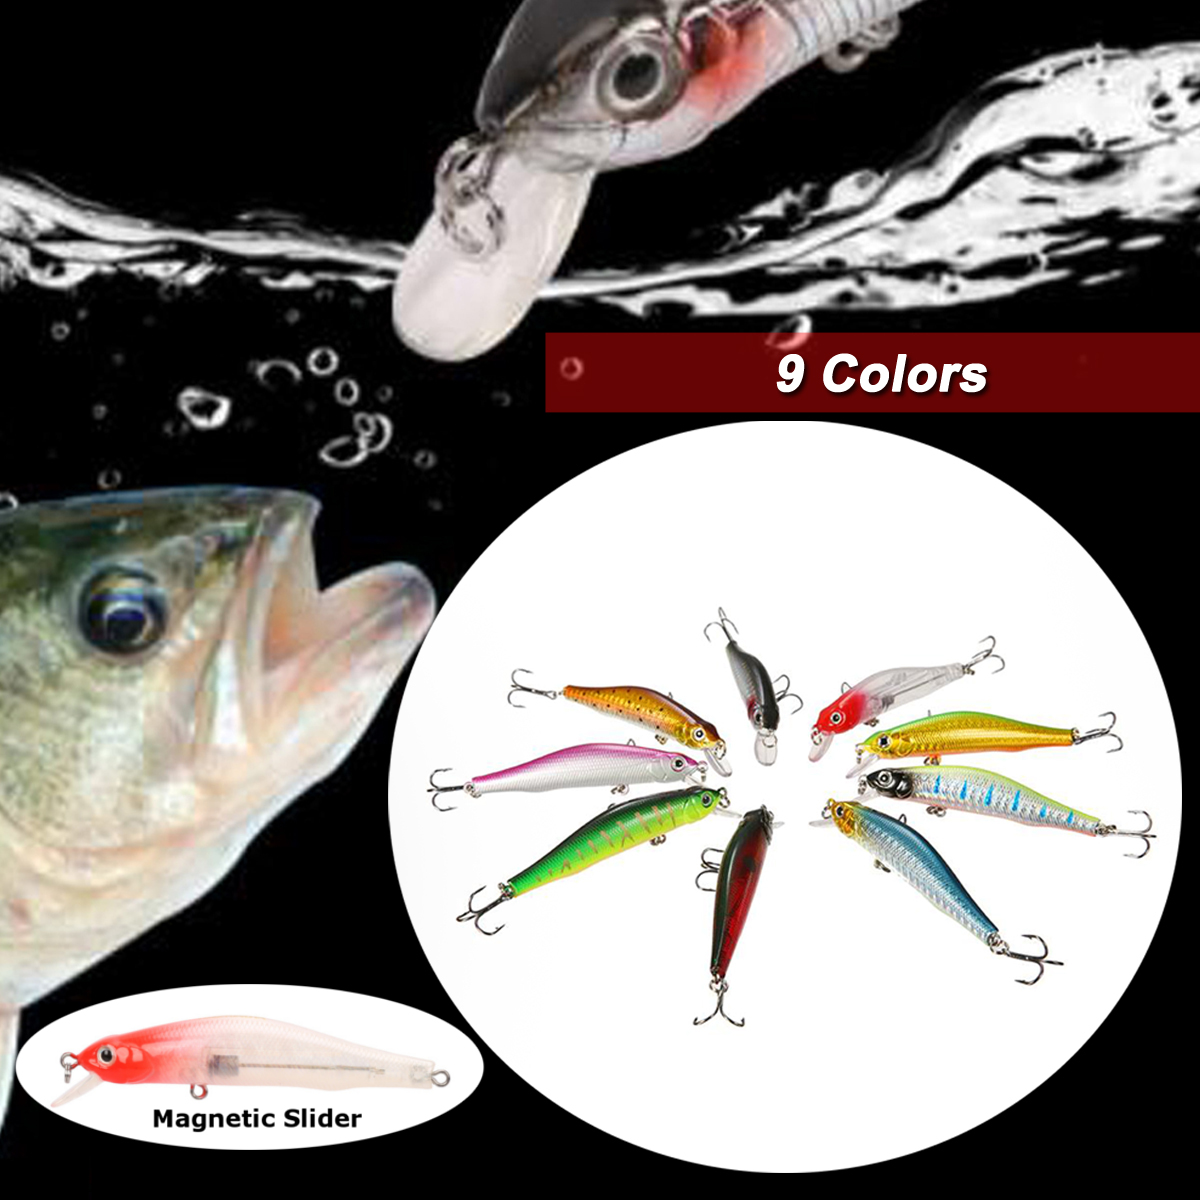 ZANLURE-1pc-80mm315quot-85g-Magnet-Minnow-Fishing-Lure-Artificial-Hard-Bait-Hook-3D-Eyes-Sea-Fishing-1314538-2